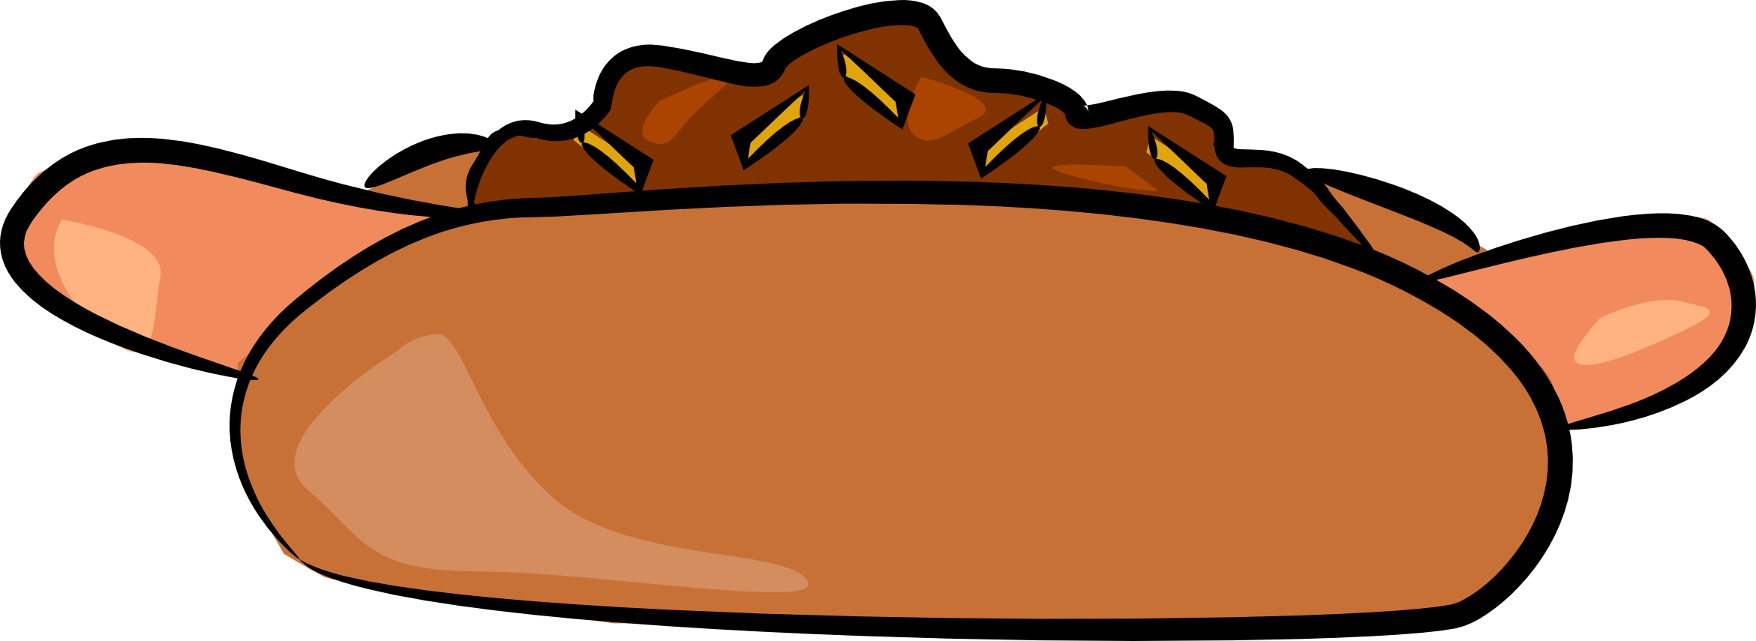 The Totally Free Clip Art Blog: Food - Chili dog